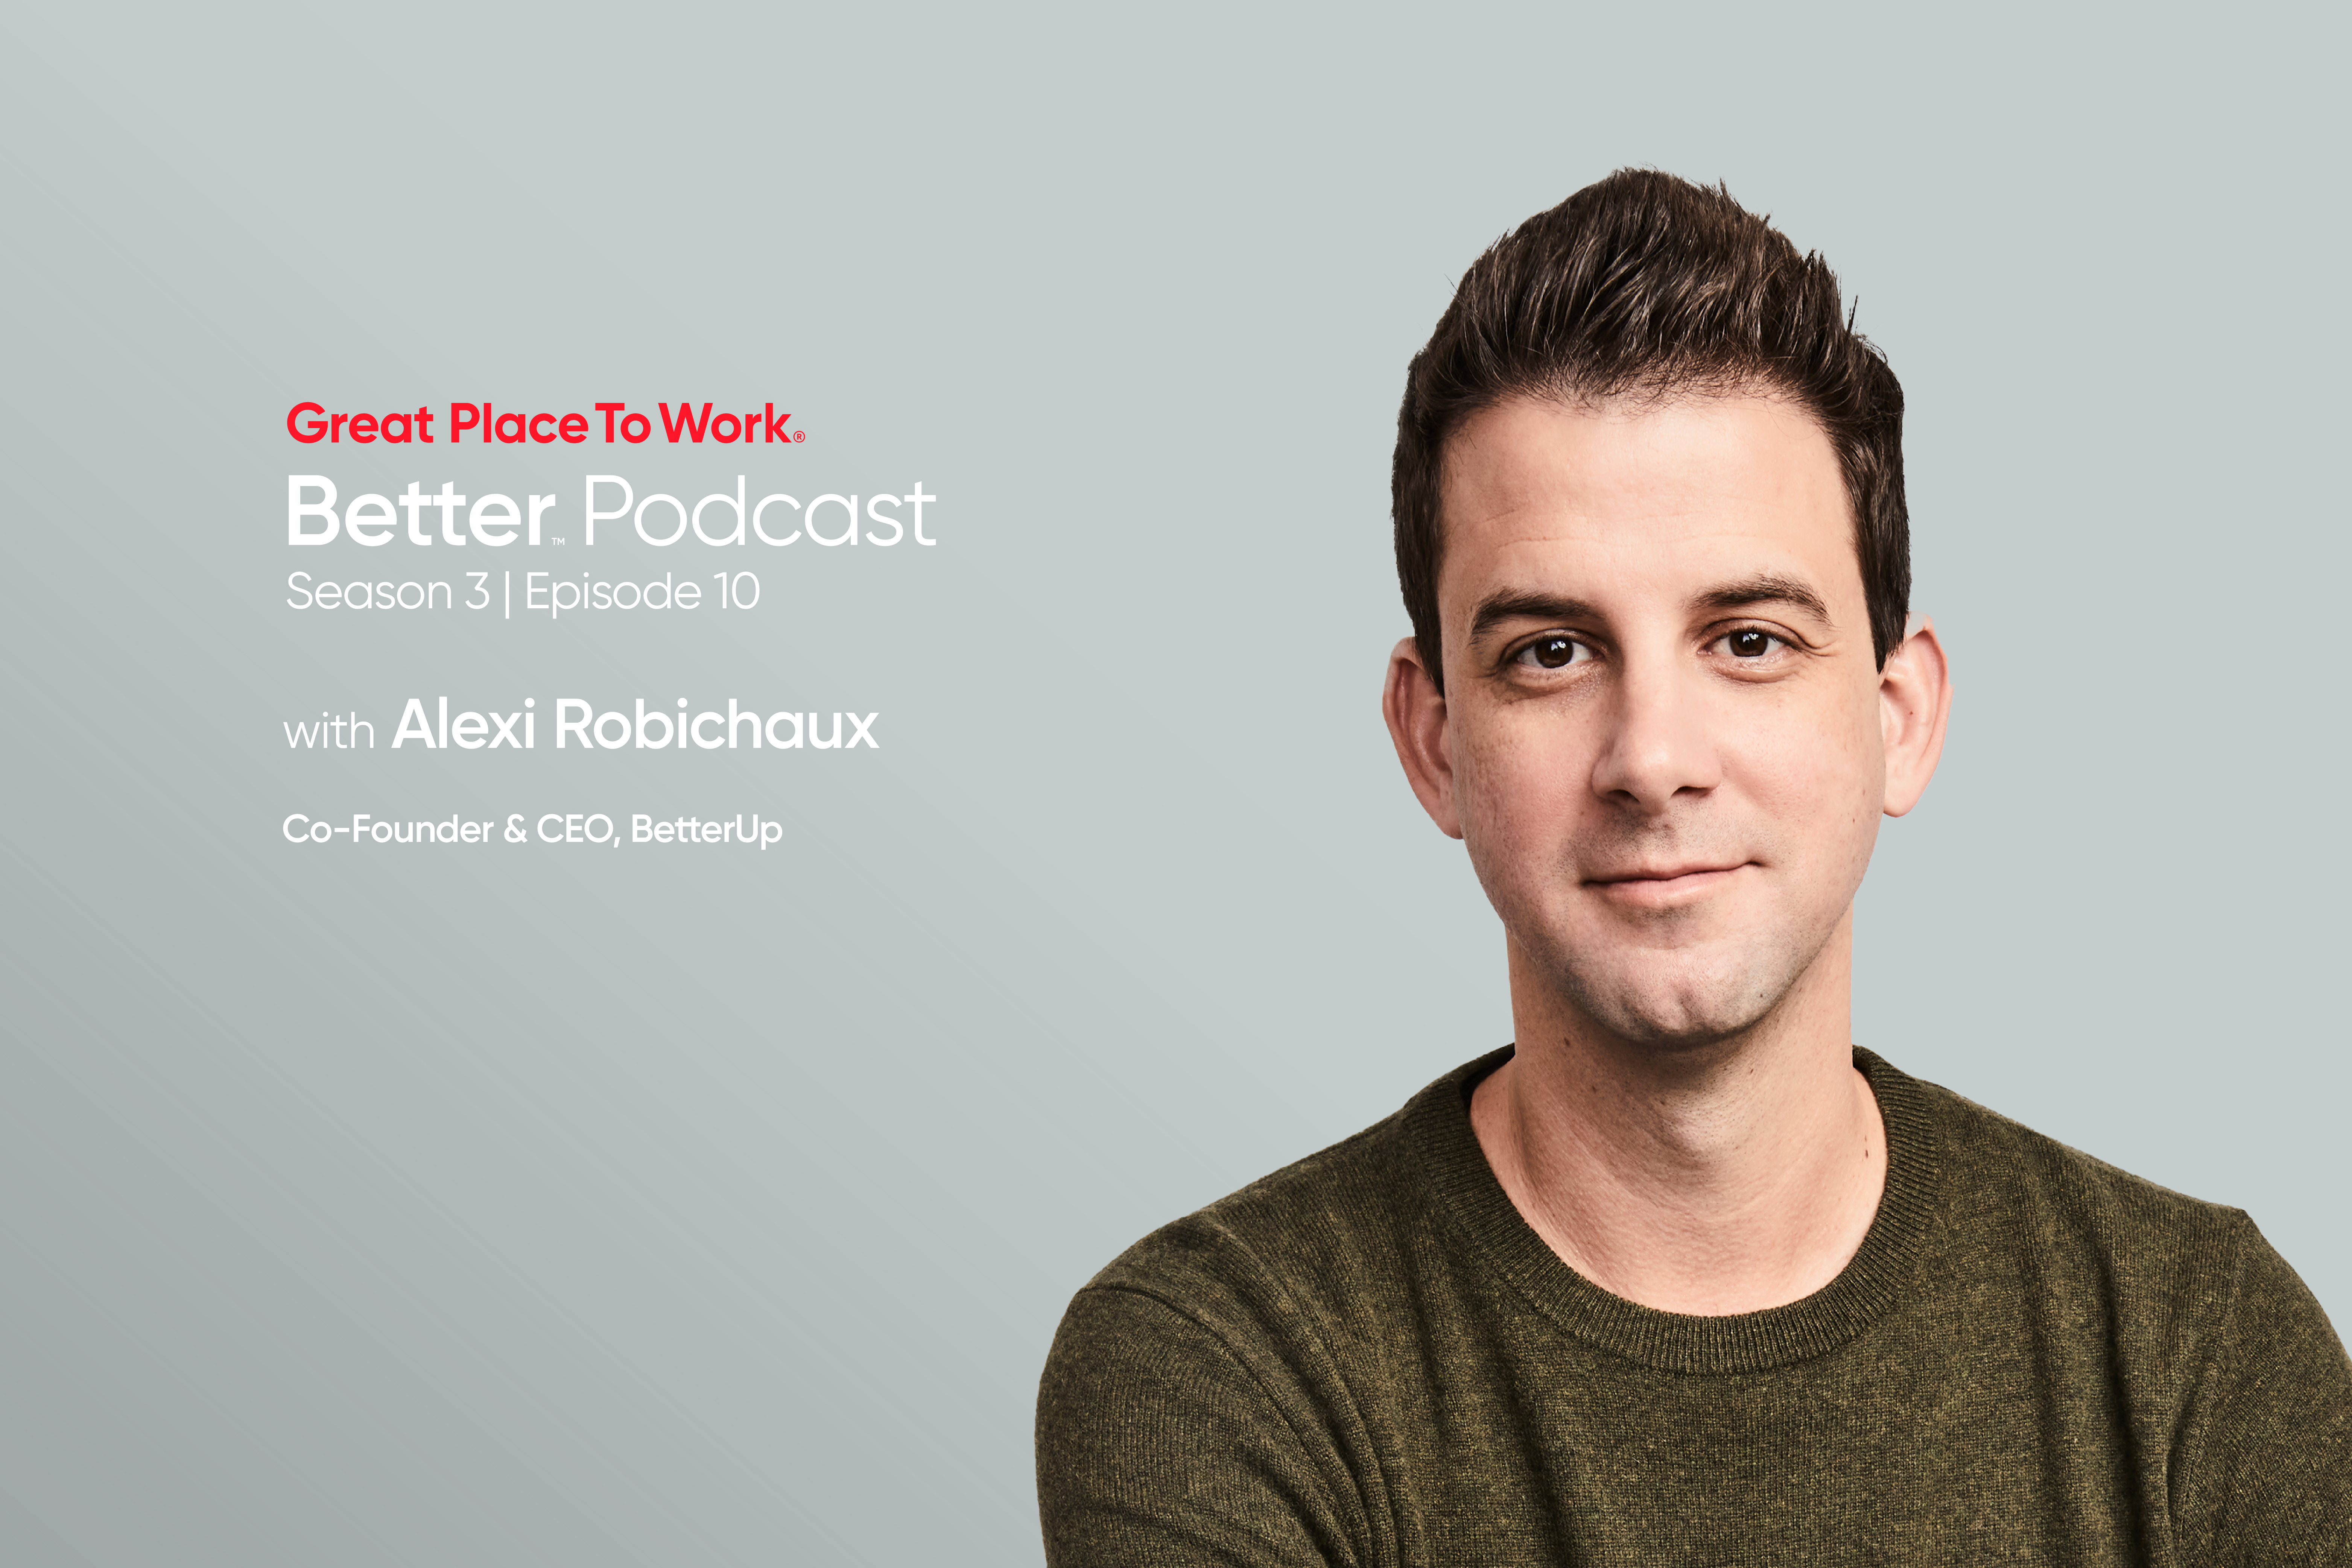  Alexi Robichaux on the Power of Special Recognition at Work